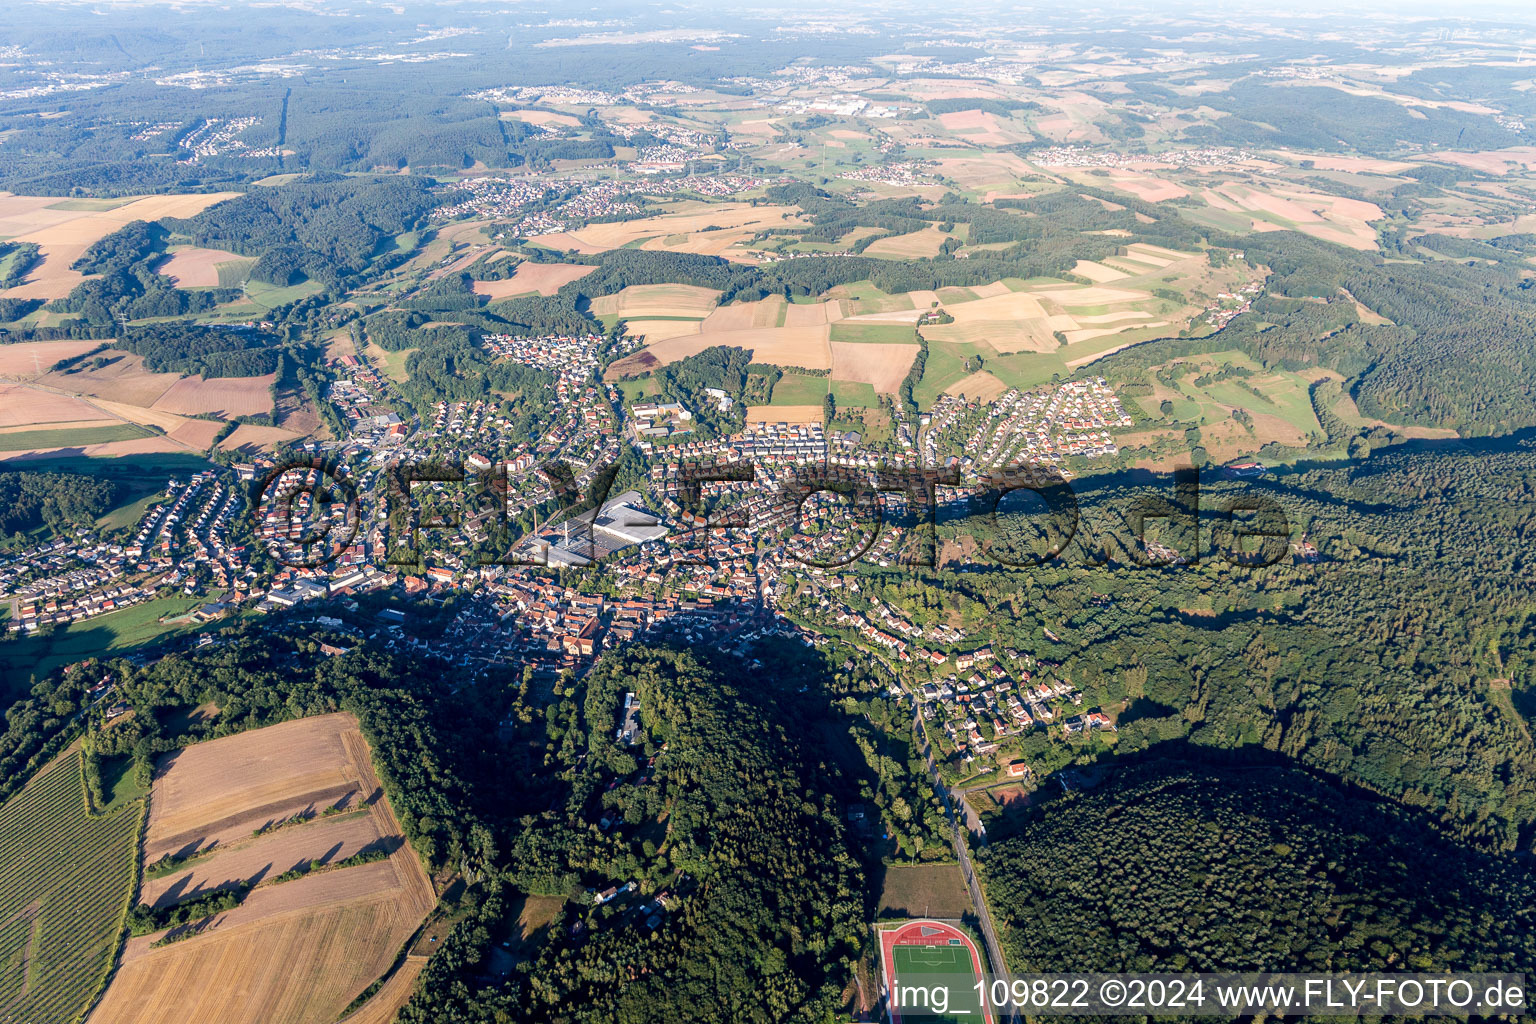 Aerial view of Otterberg in the state Rhineland-Palatinate, Germany